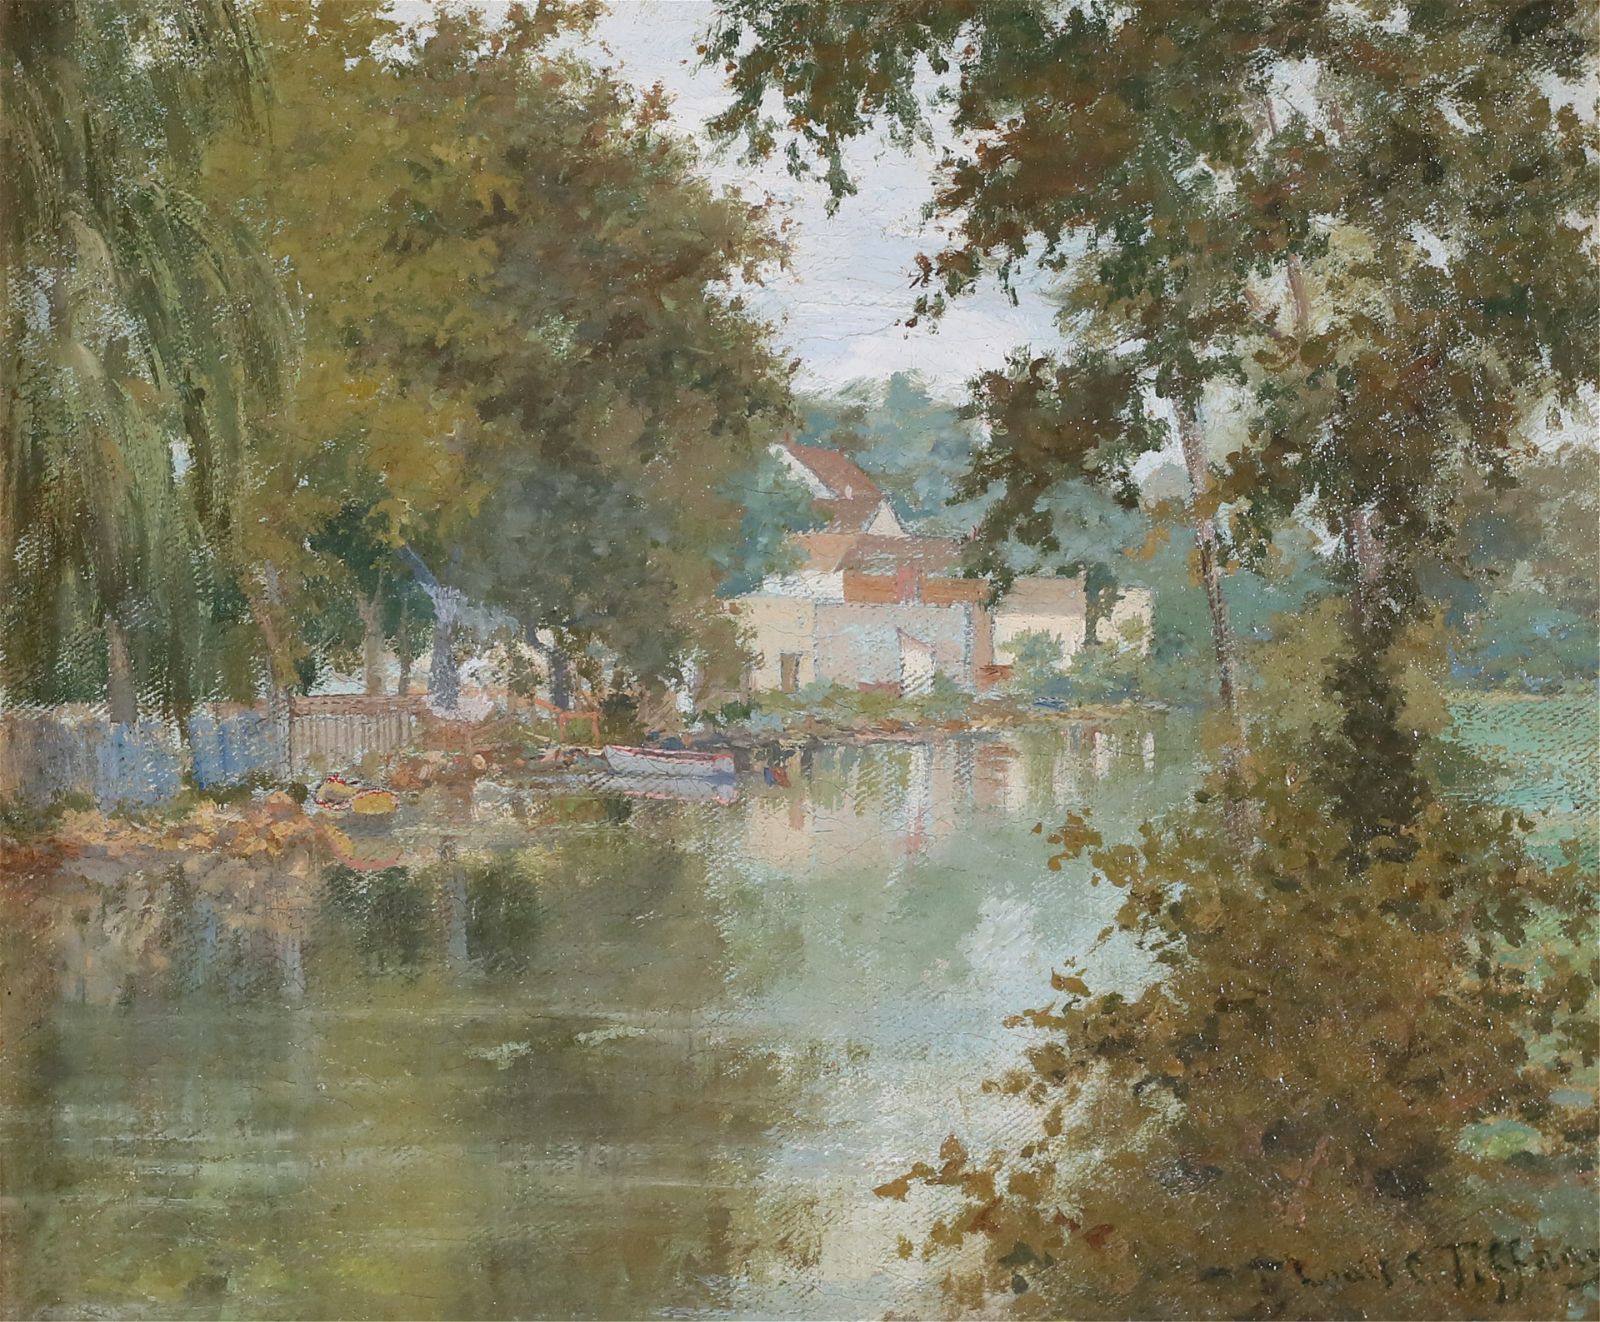 River landscape by Louis Comfort Tiffany, estimate $6,000-$8,000 at Willow Auction House.